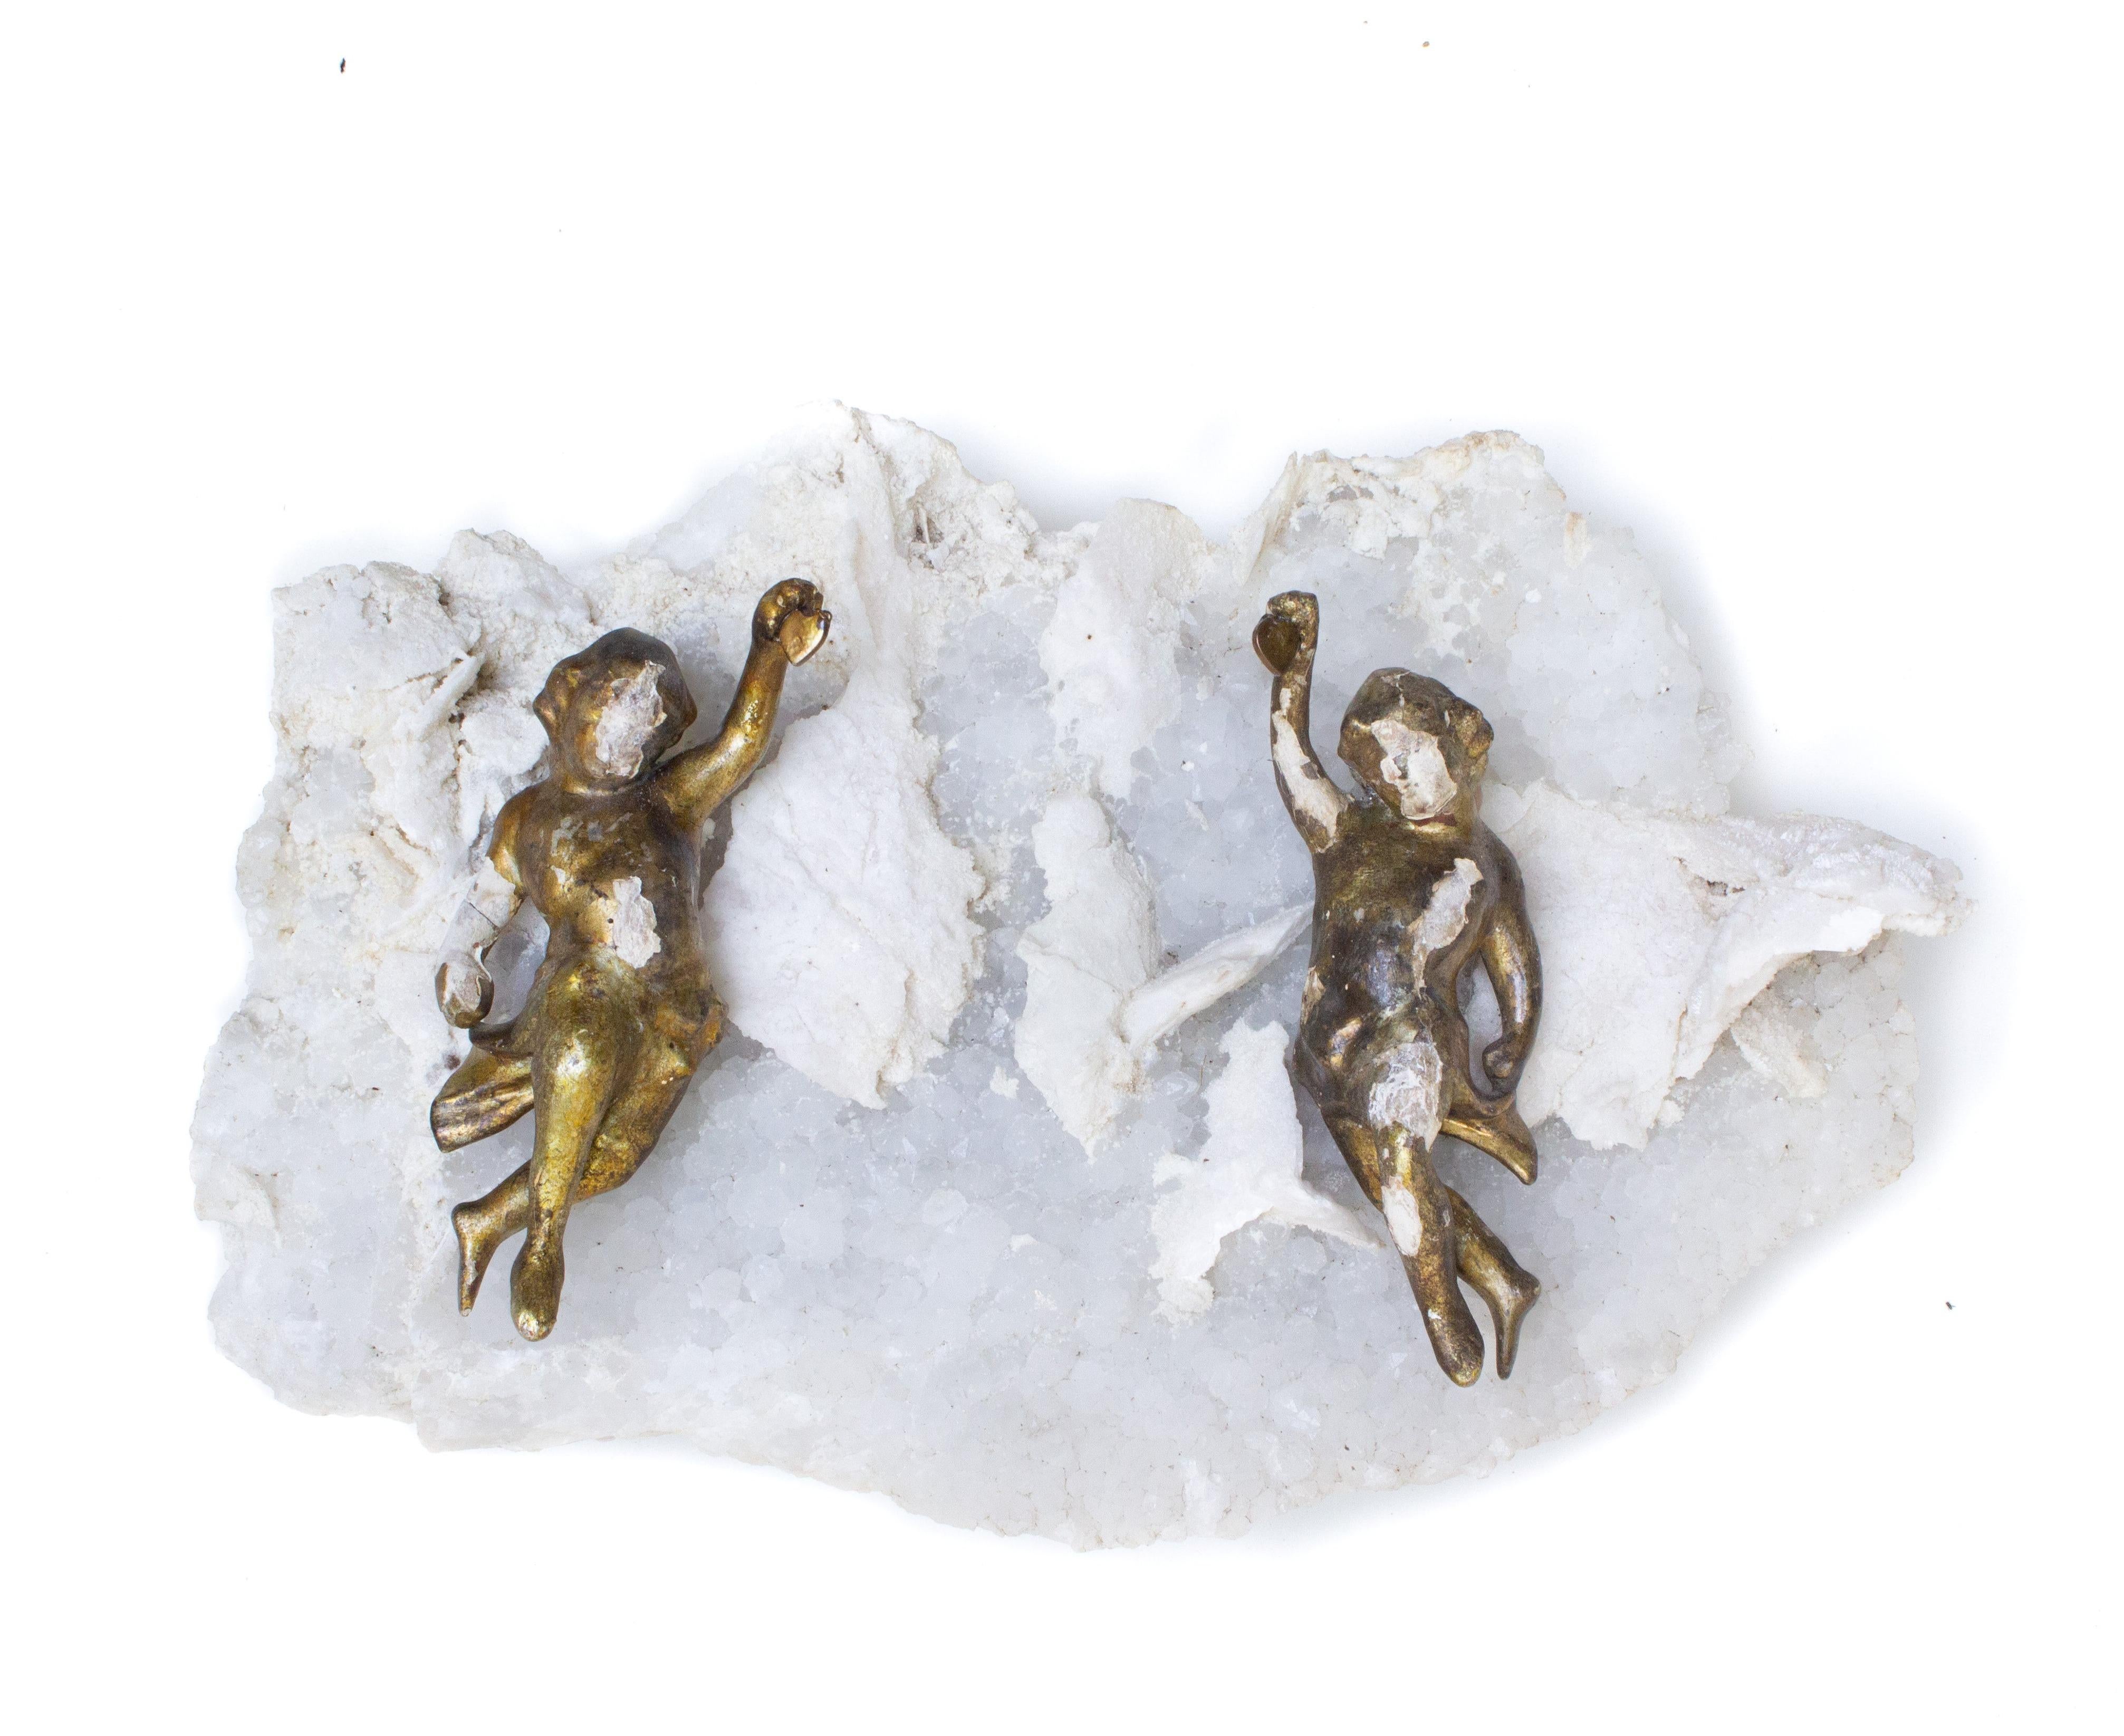 Pair of 18th century Italian hand-carved gold leaf angels mounted on amethyst and calcite in matrix. The hand-carved angels were once part of a heavenly, angelic depiction in a historic church in Tuscany.

The angels are placed onto the amethyst and